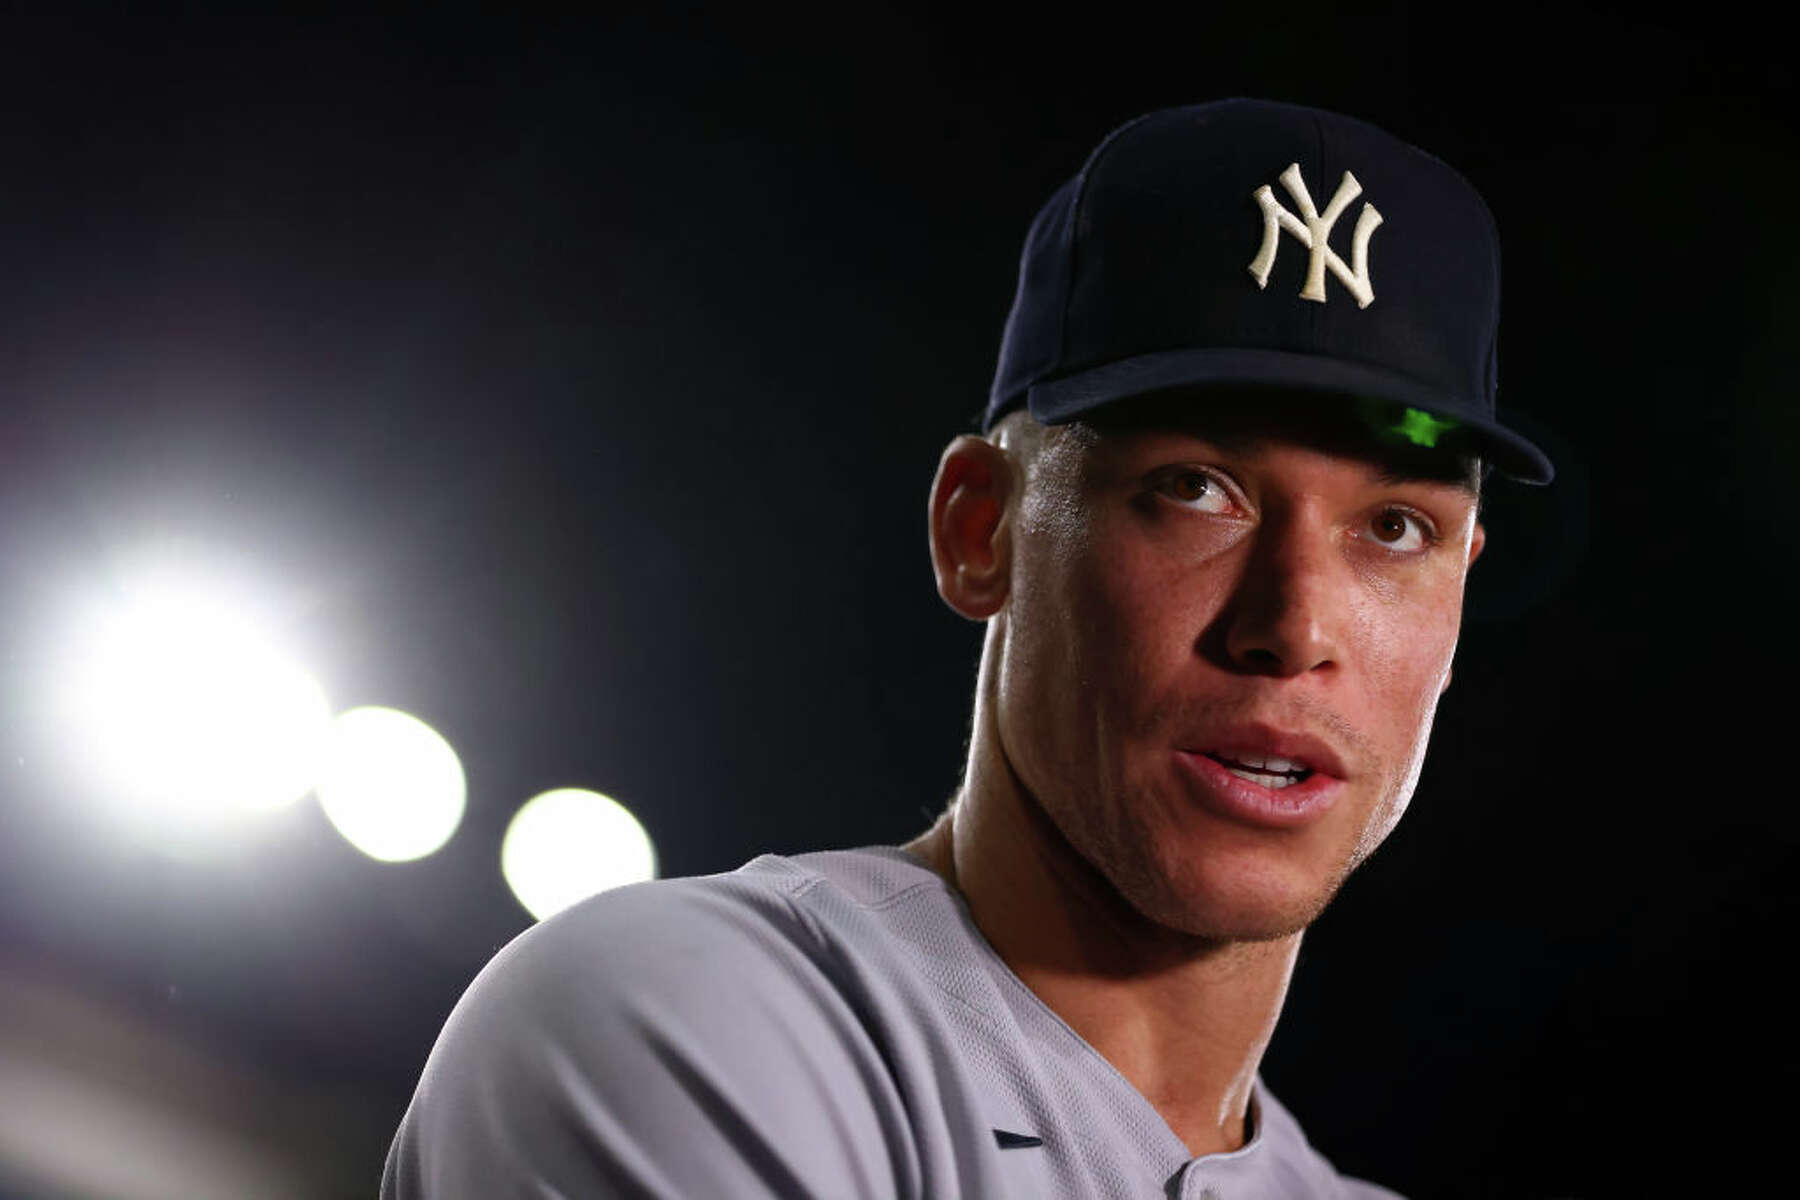 Could Aaron Judge follow idol Barry Bonds and go to the Giants?